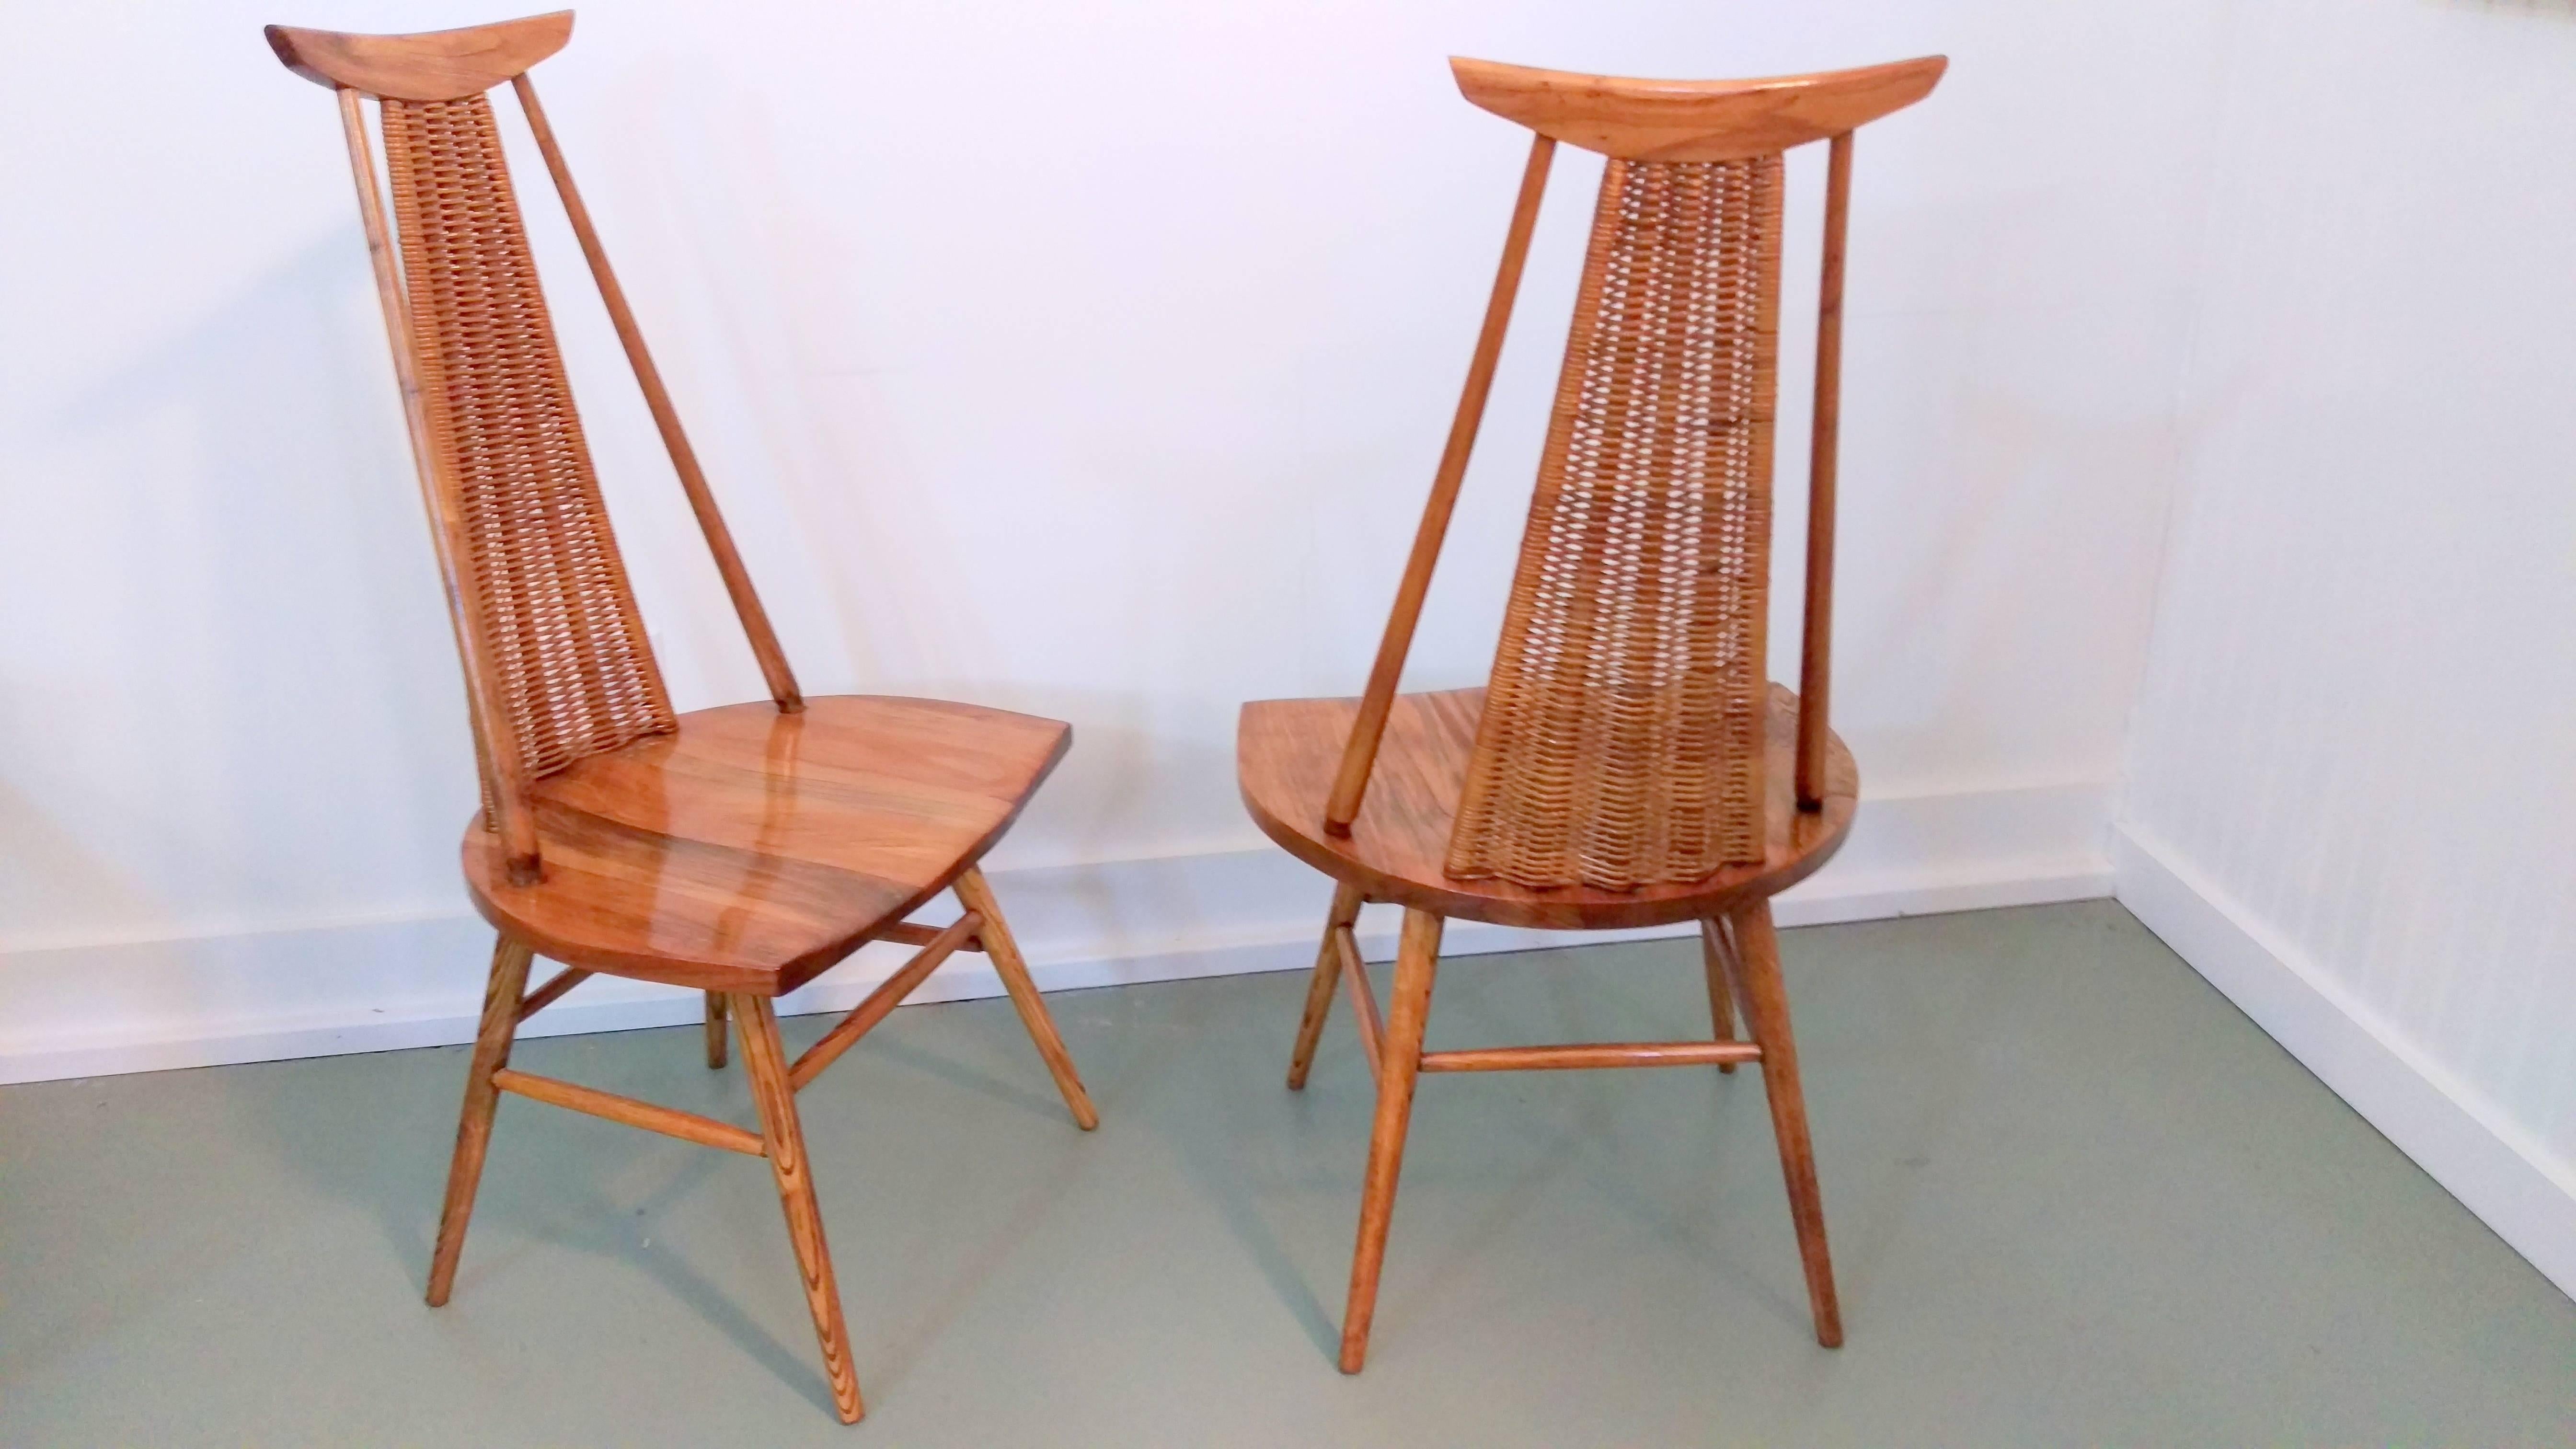 Extremely rare and exquisite pair of easy chairs by Finnish Architect Ilmari Tapiovaara. The chairs are fine example of Tapiovaara known to combine modern design aesthetic and Finnish peasant tradition. The use of solid wood added to the aura of